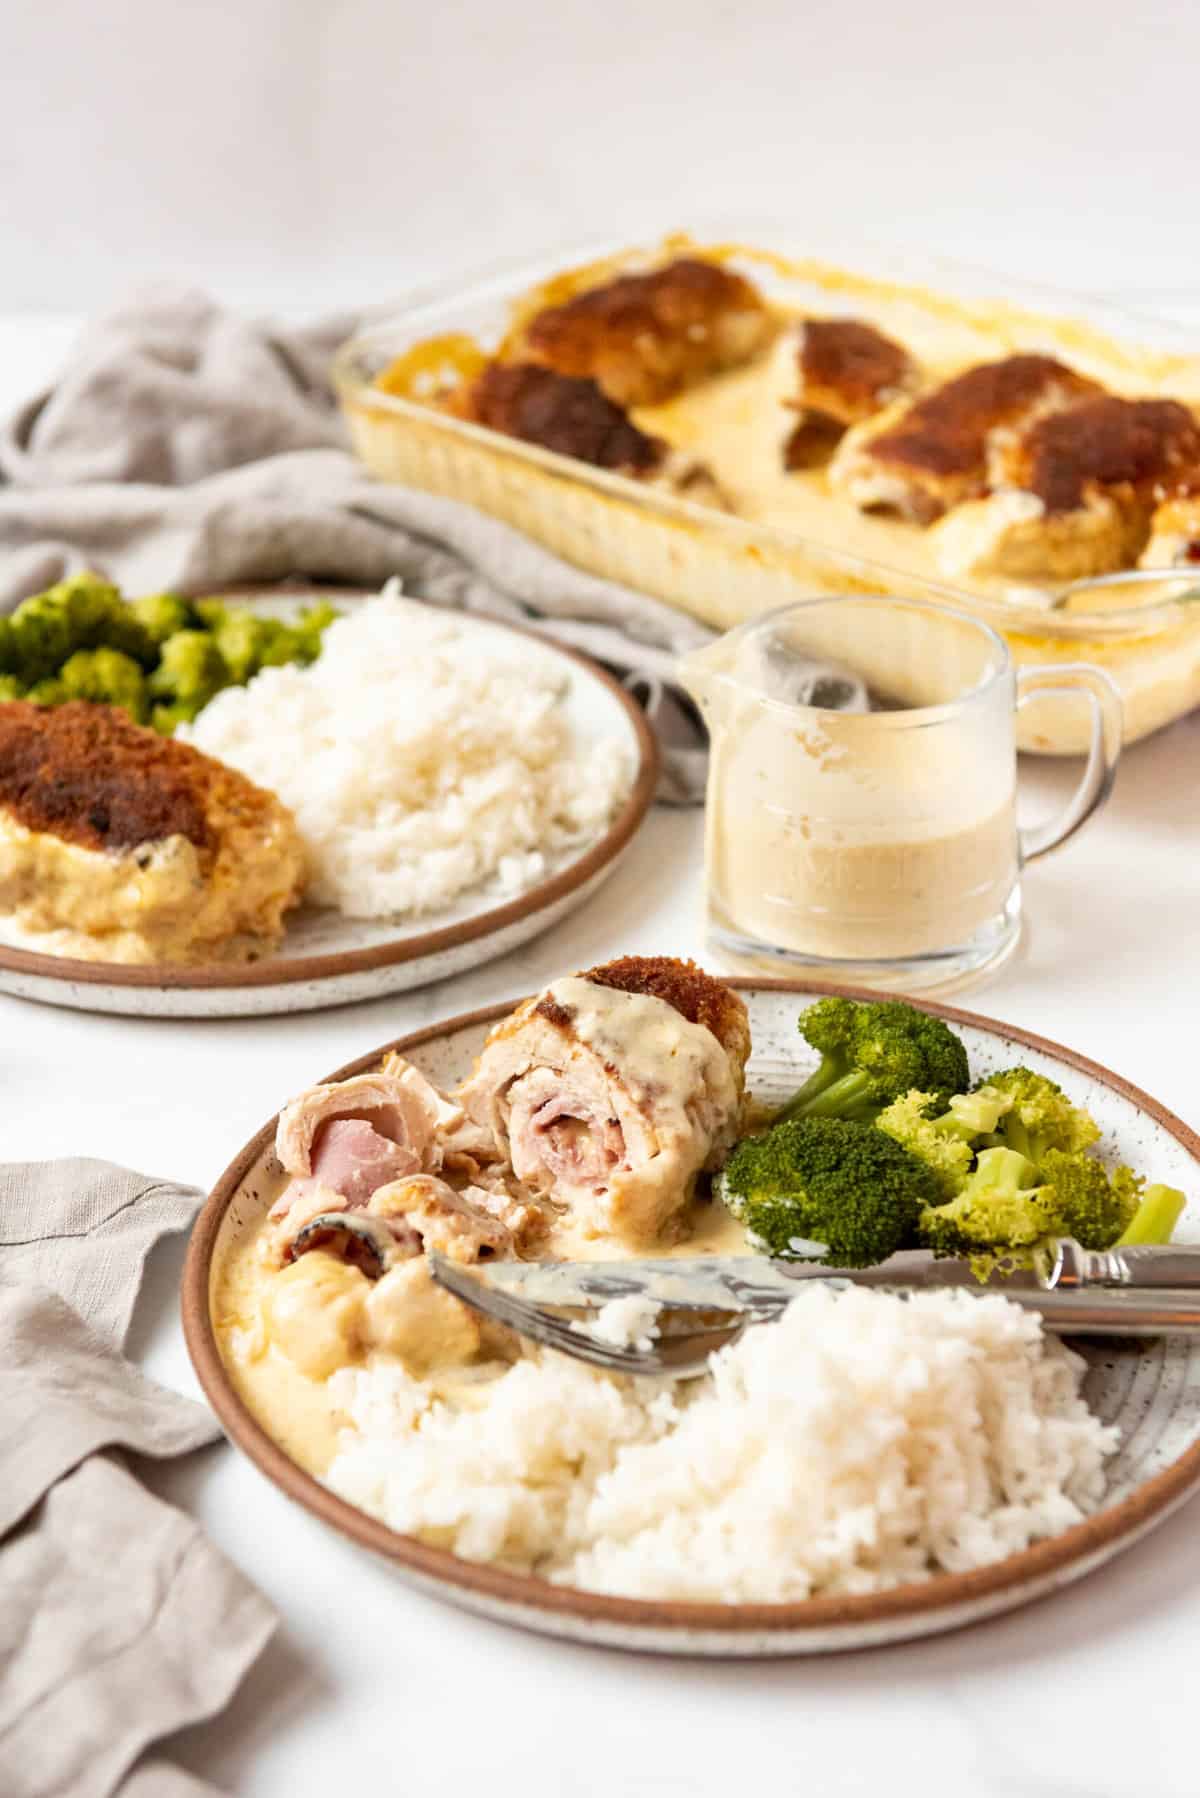 A plate of partially eaten chicken cordon bleu with rice and broccoli next to more plates and a glass pitcher of sauce.